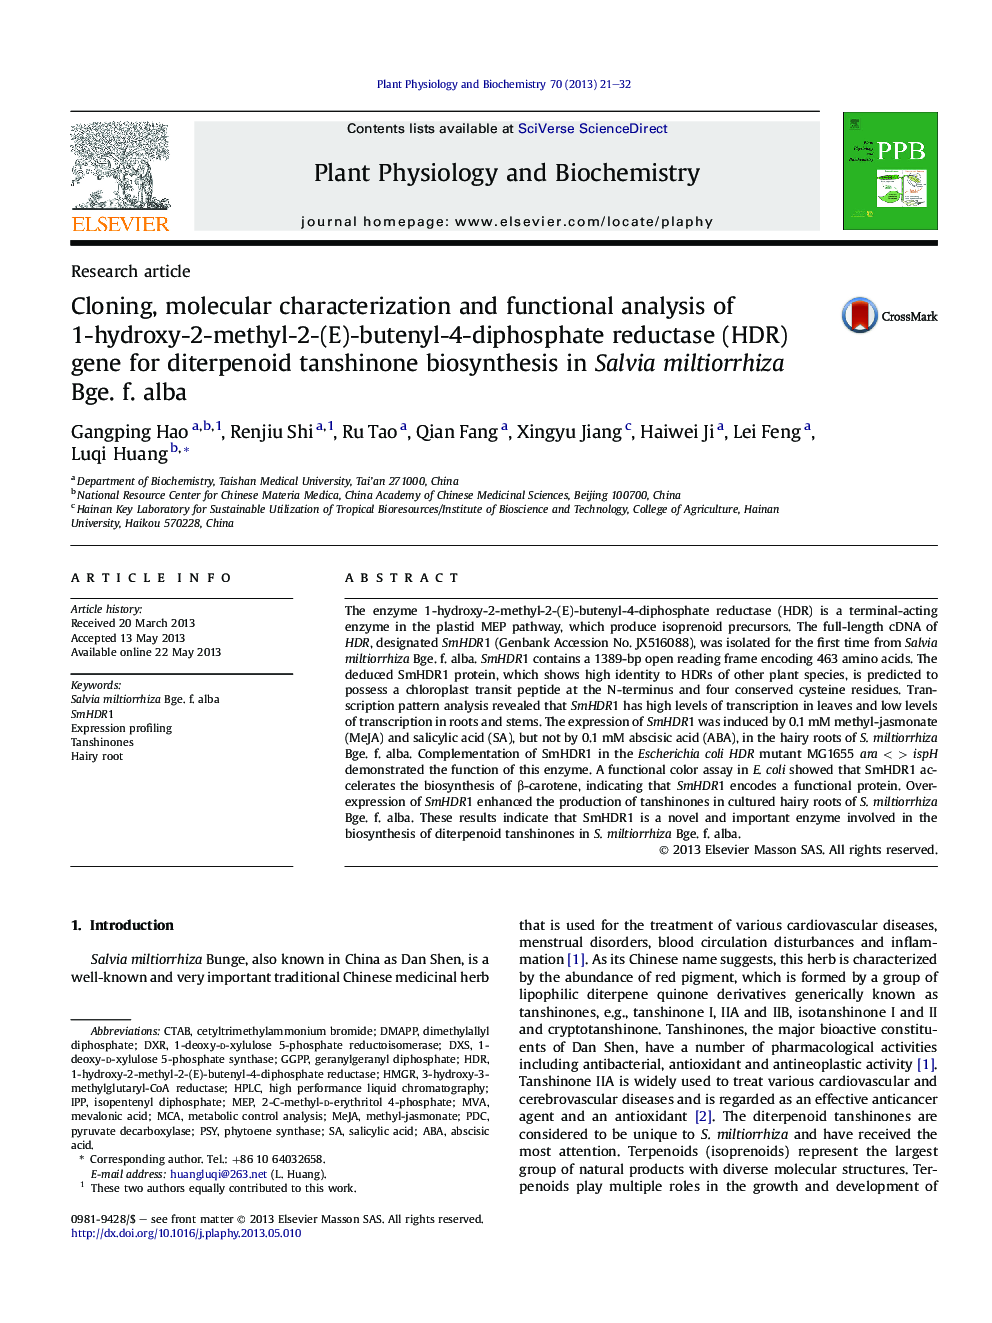 Cloning, molecular characterization and functional analysis of 1-hydroxy-2-methyl-2-(E)-butenyl-4-diphosphate reductase (HDR) gene for diterpenoid tanshinone biosynthesis in Salvia miltiorrhiza Bge. f. alba